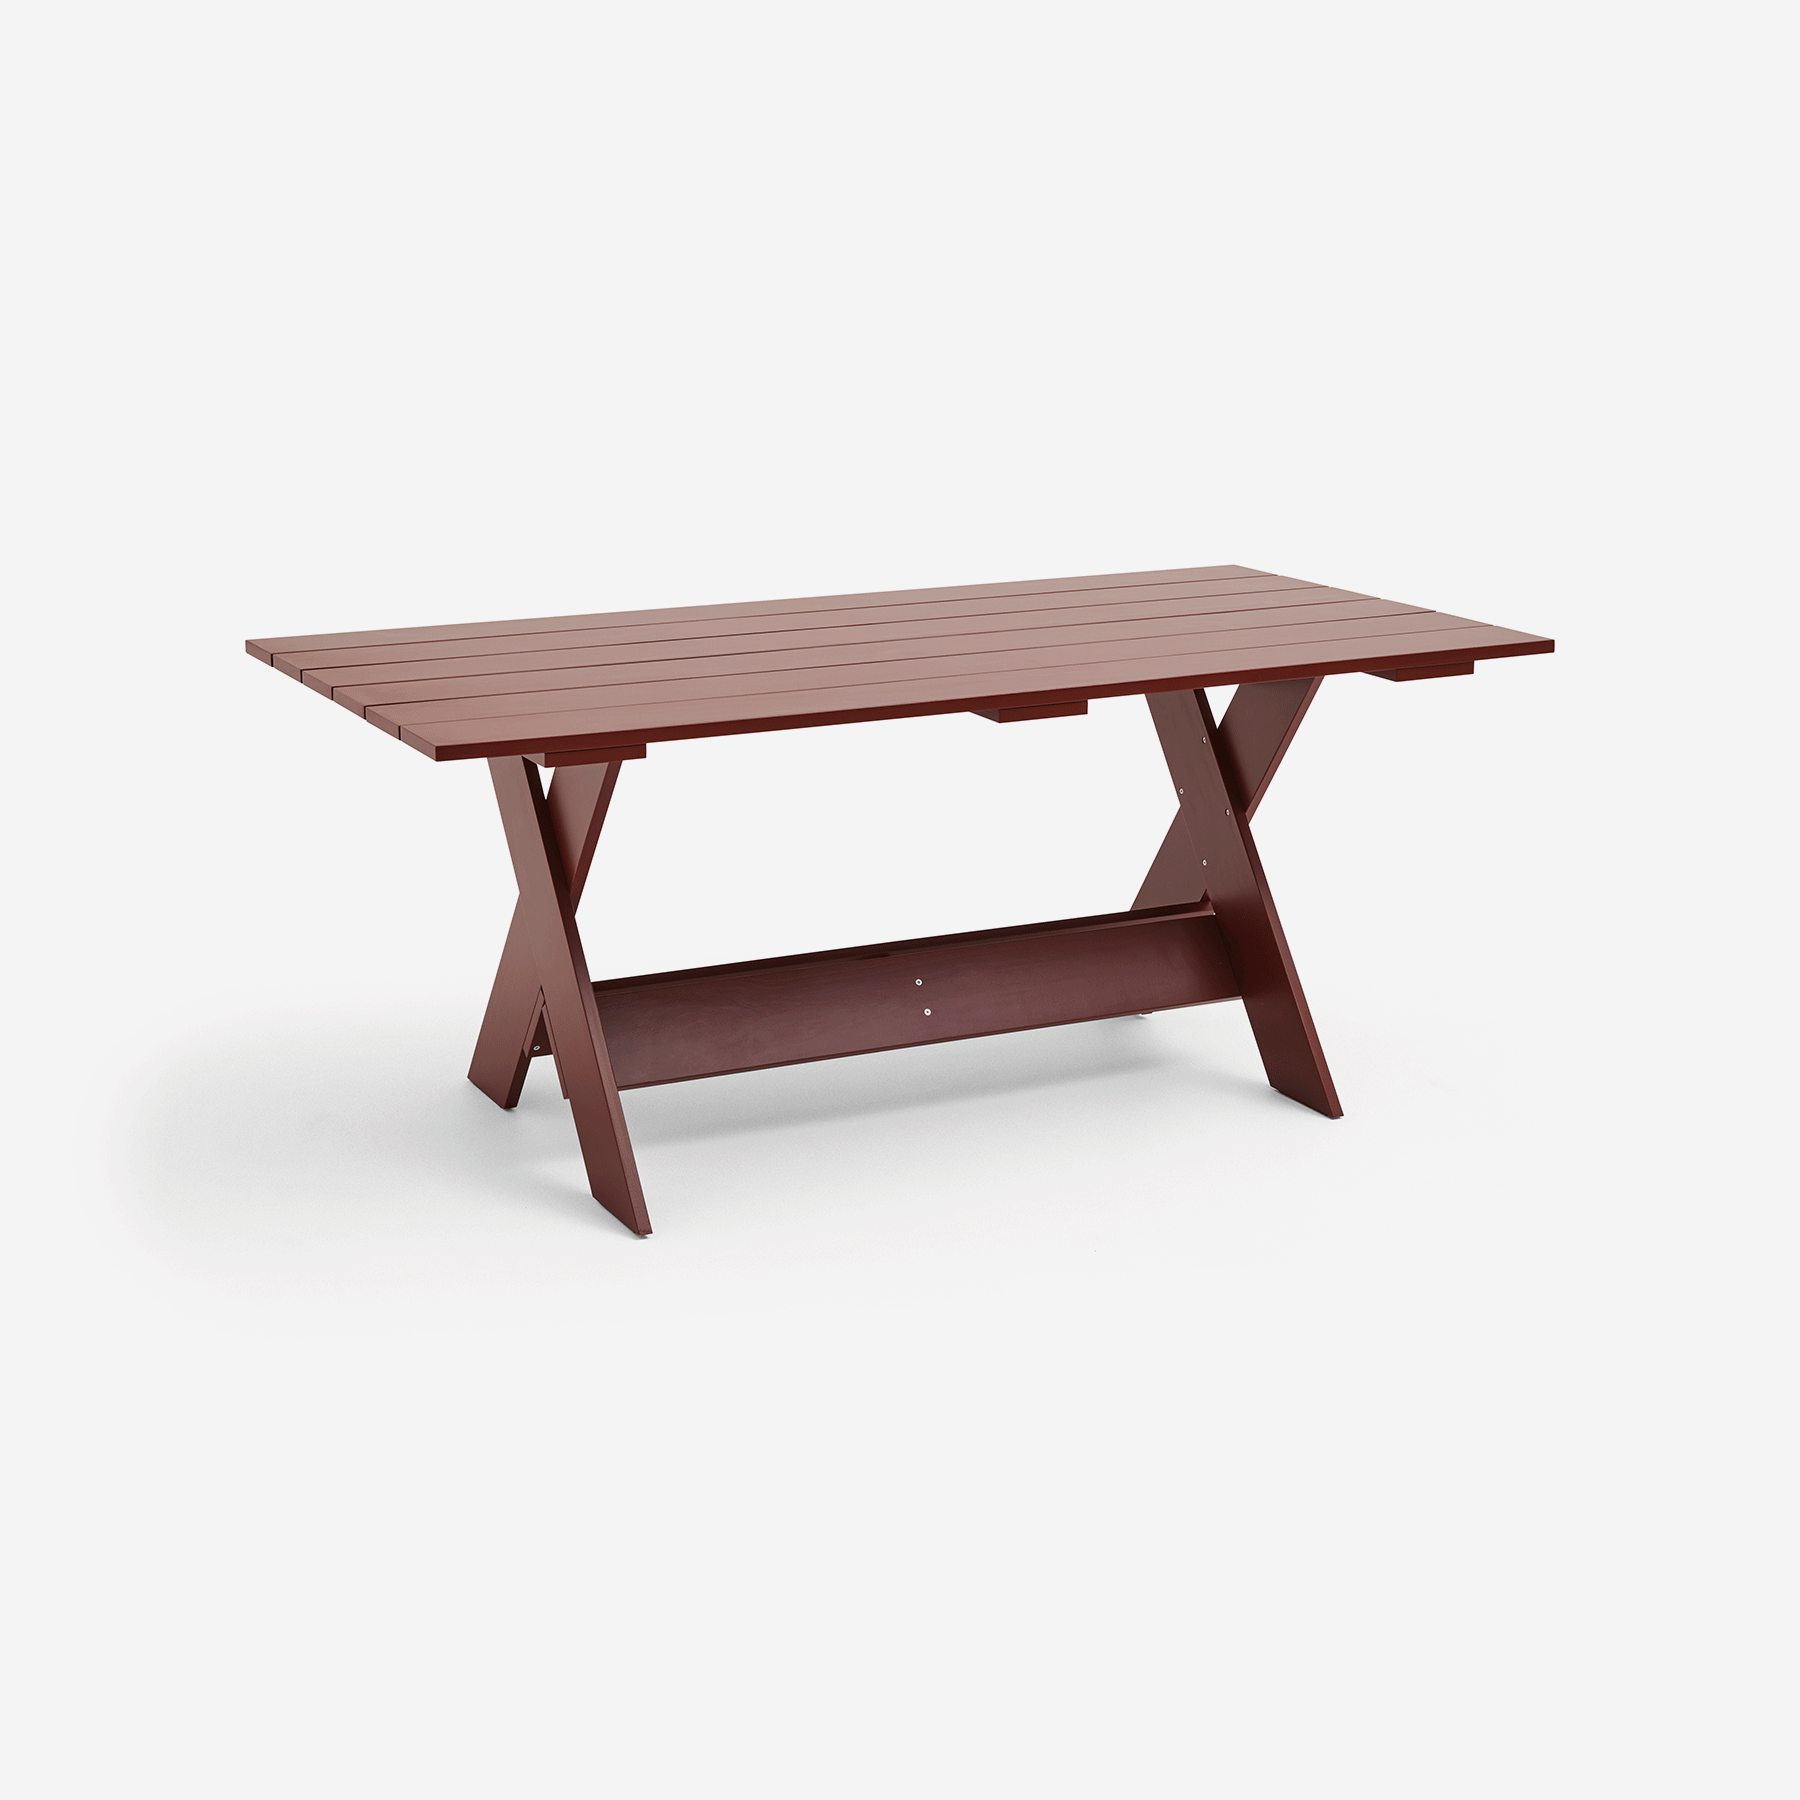 Crate Dining Table, 180cm